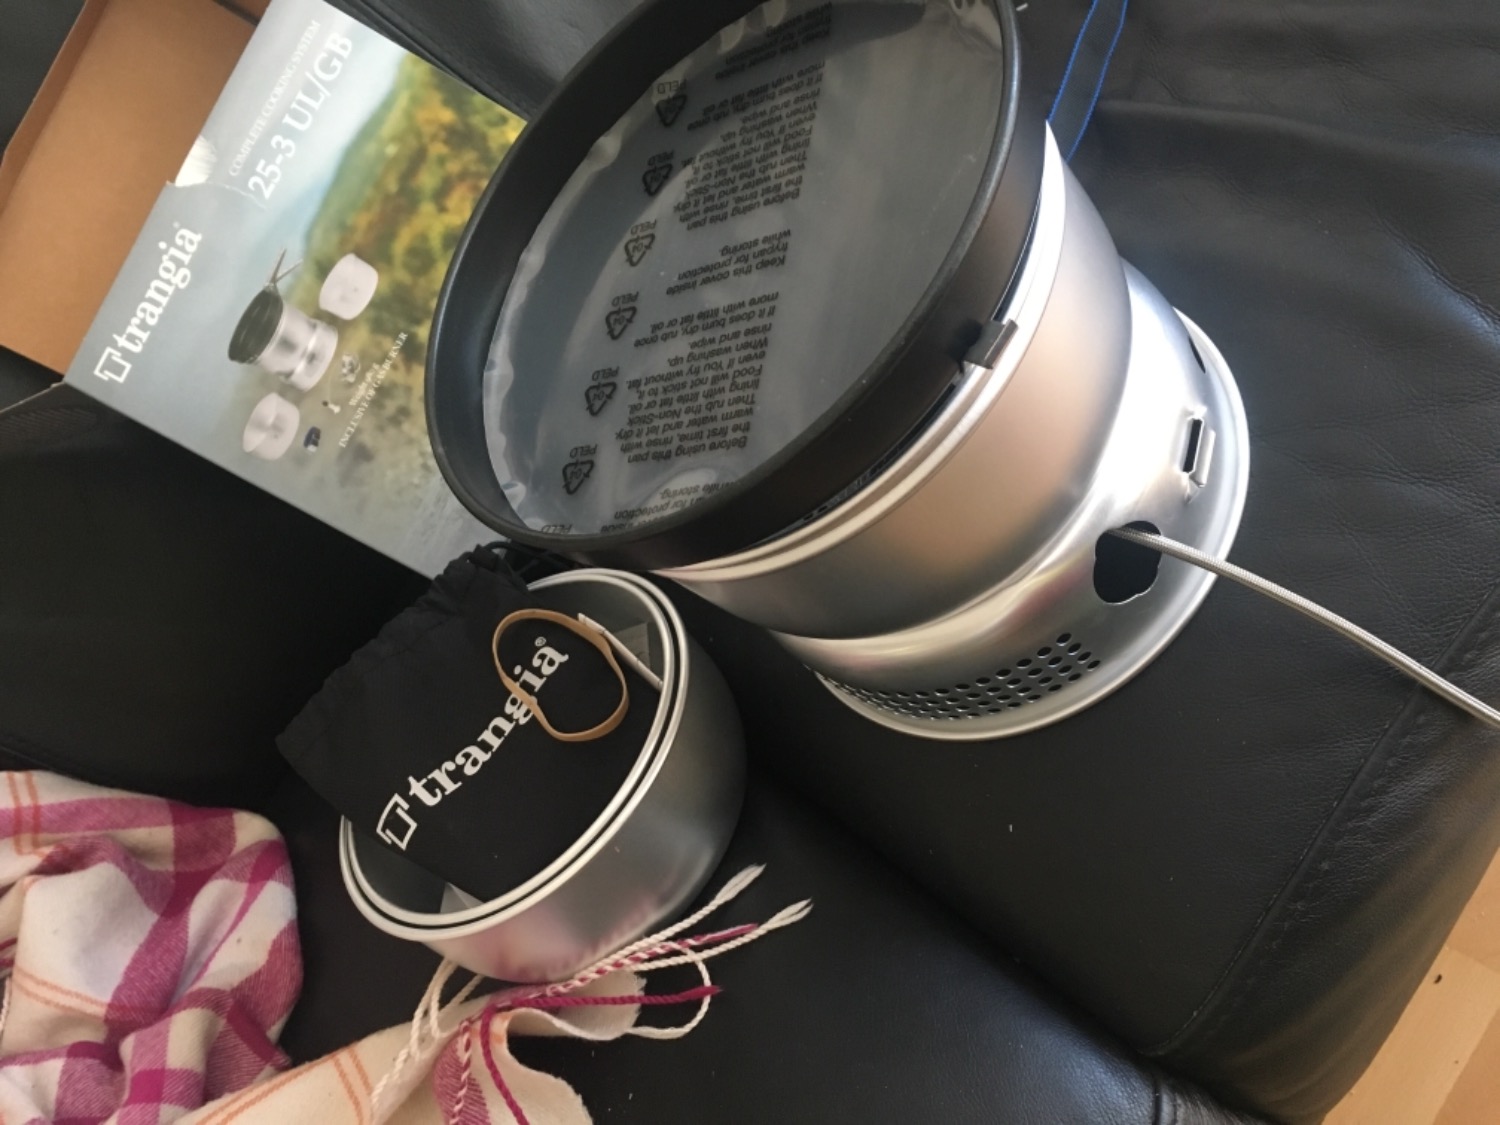 Trangia Stove Review - 25-3 UL In Winter Conditions 